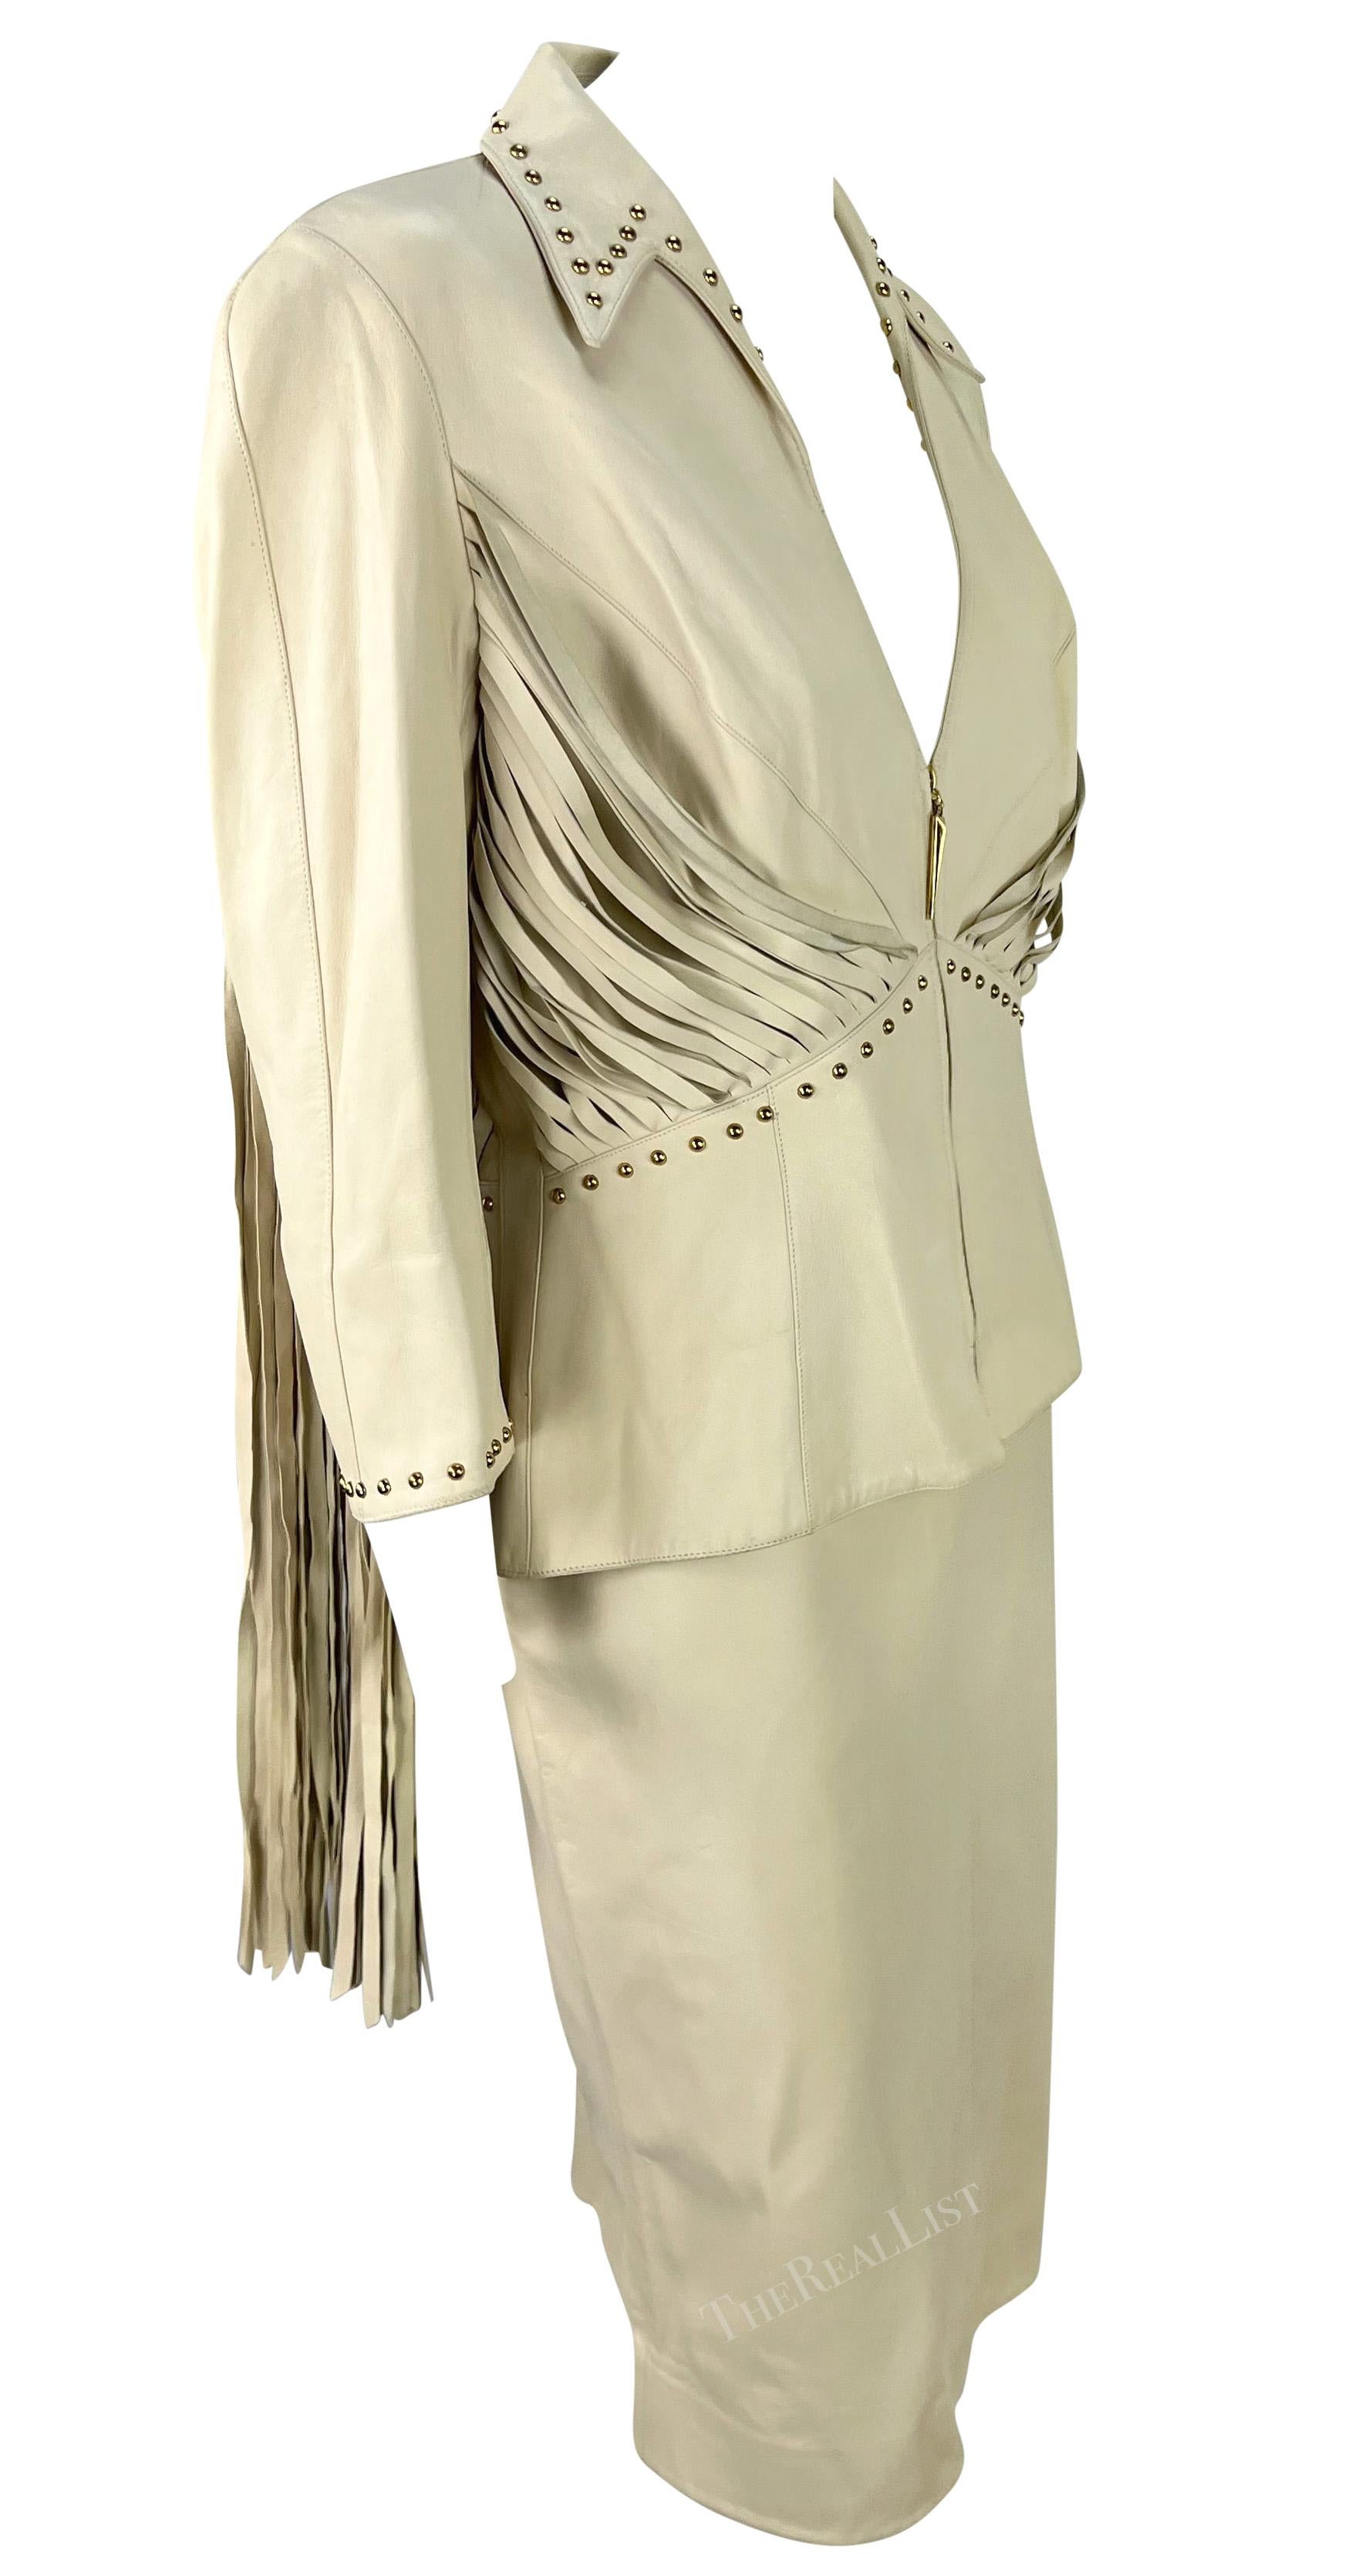 Early 2000s Thierry Mugler Couture Studded Beige Leather Fringe Skirt Suit For Sale 1